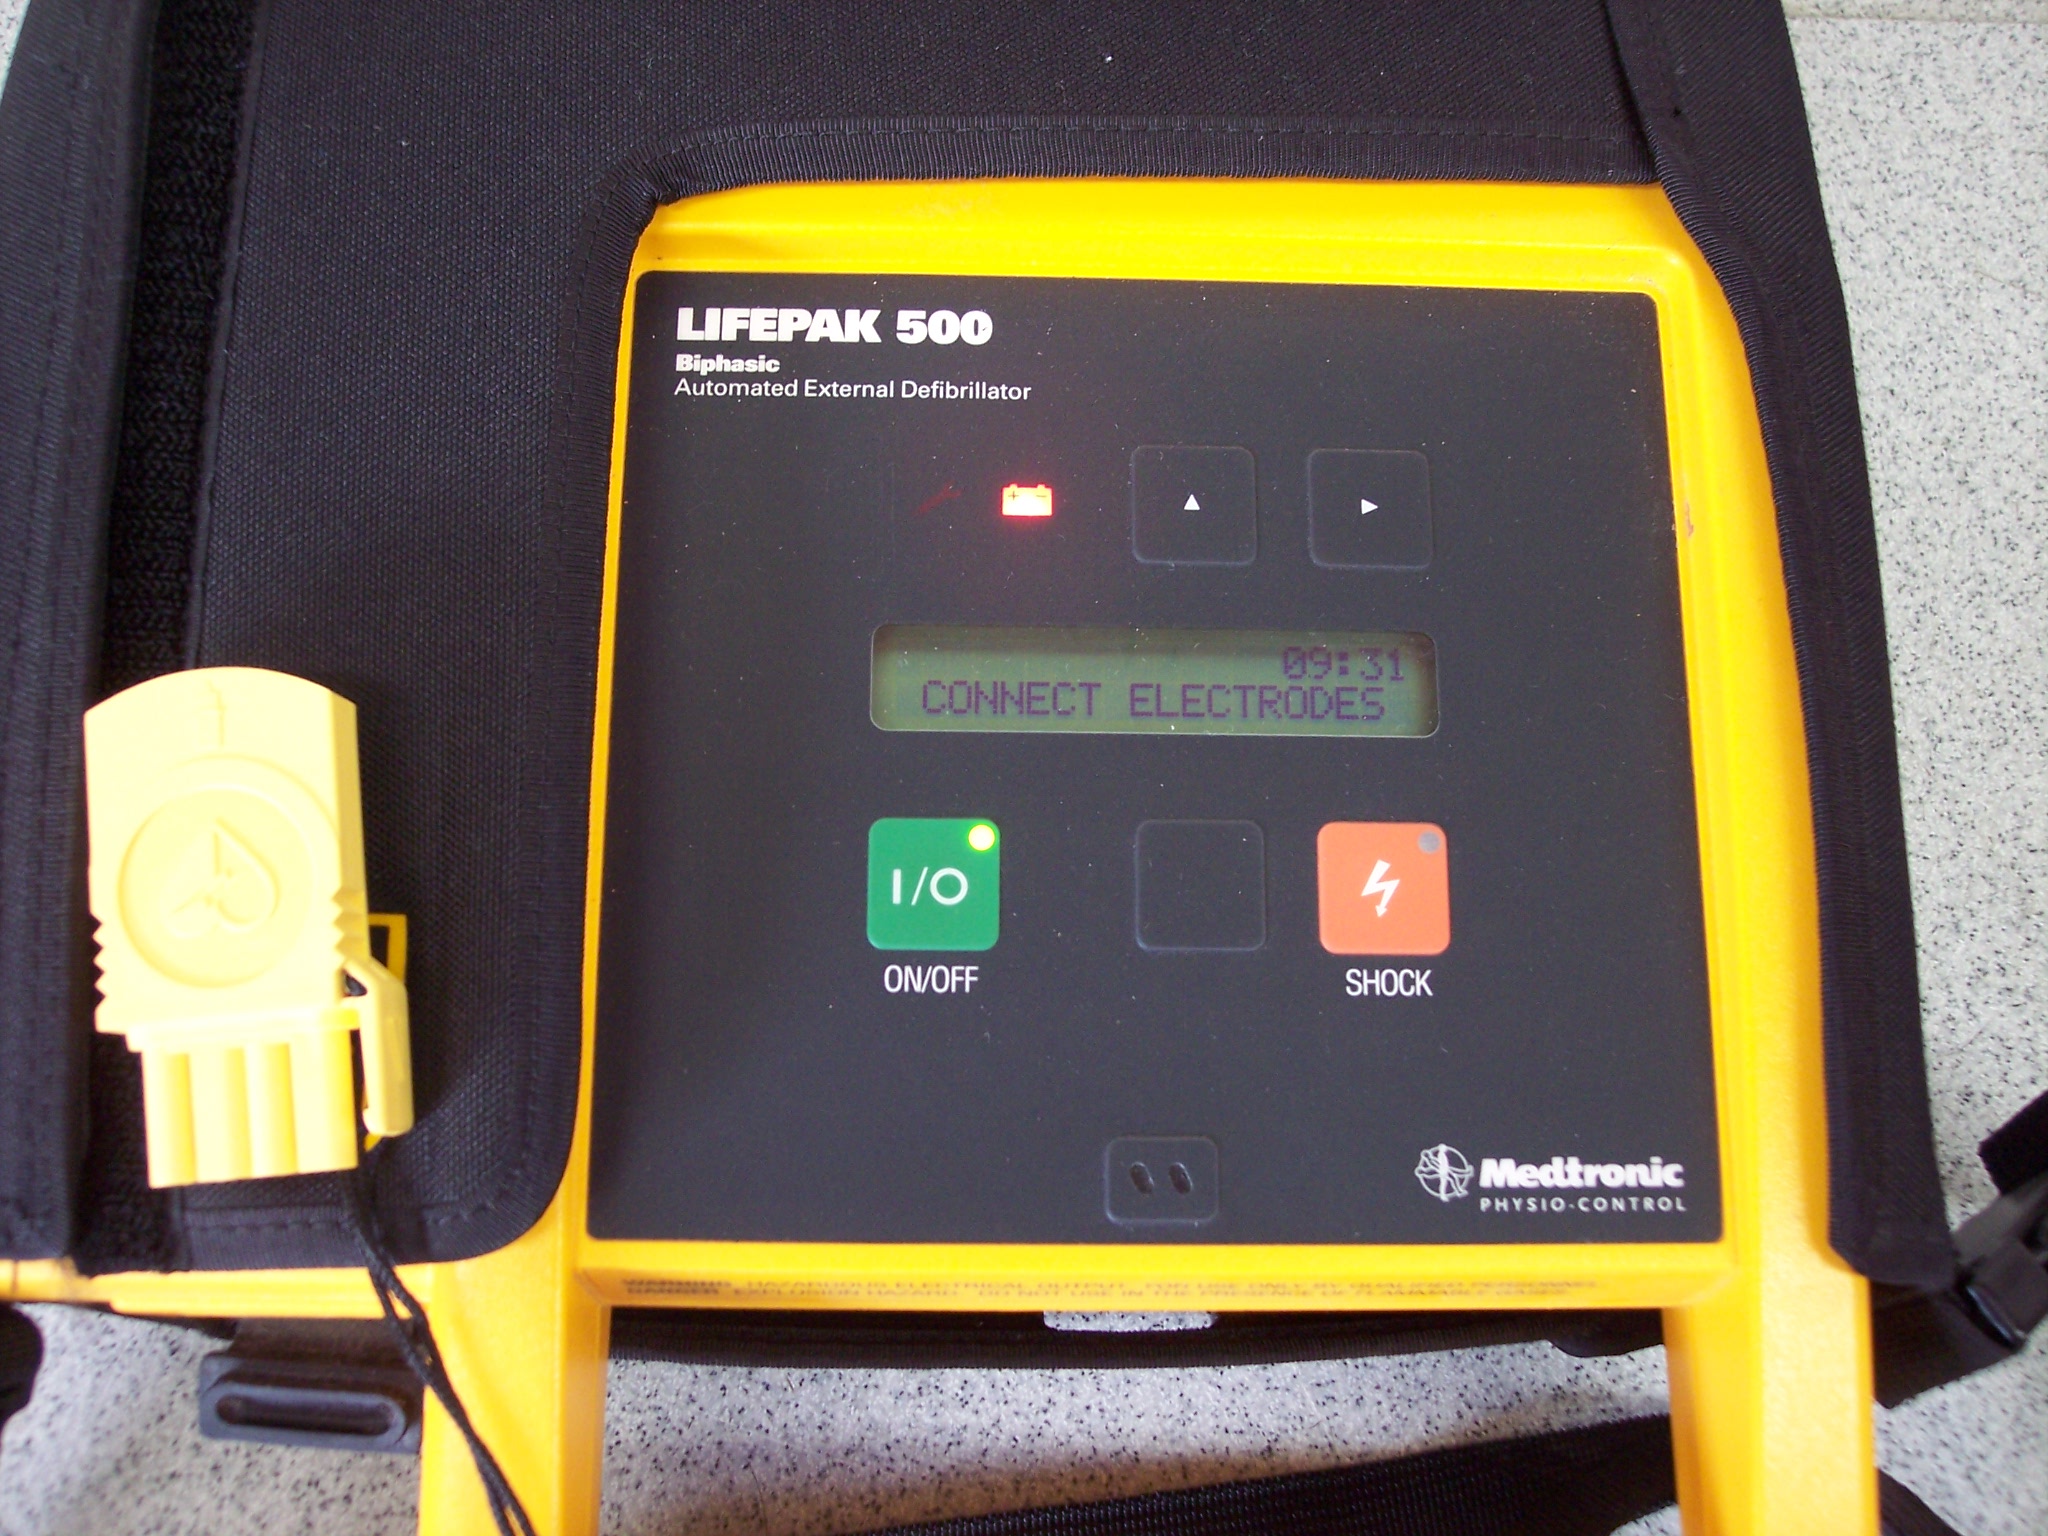 Medtronic Physio-Control Lifepak 500 Biphasic AED (Automated External Defibrillator)500